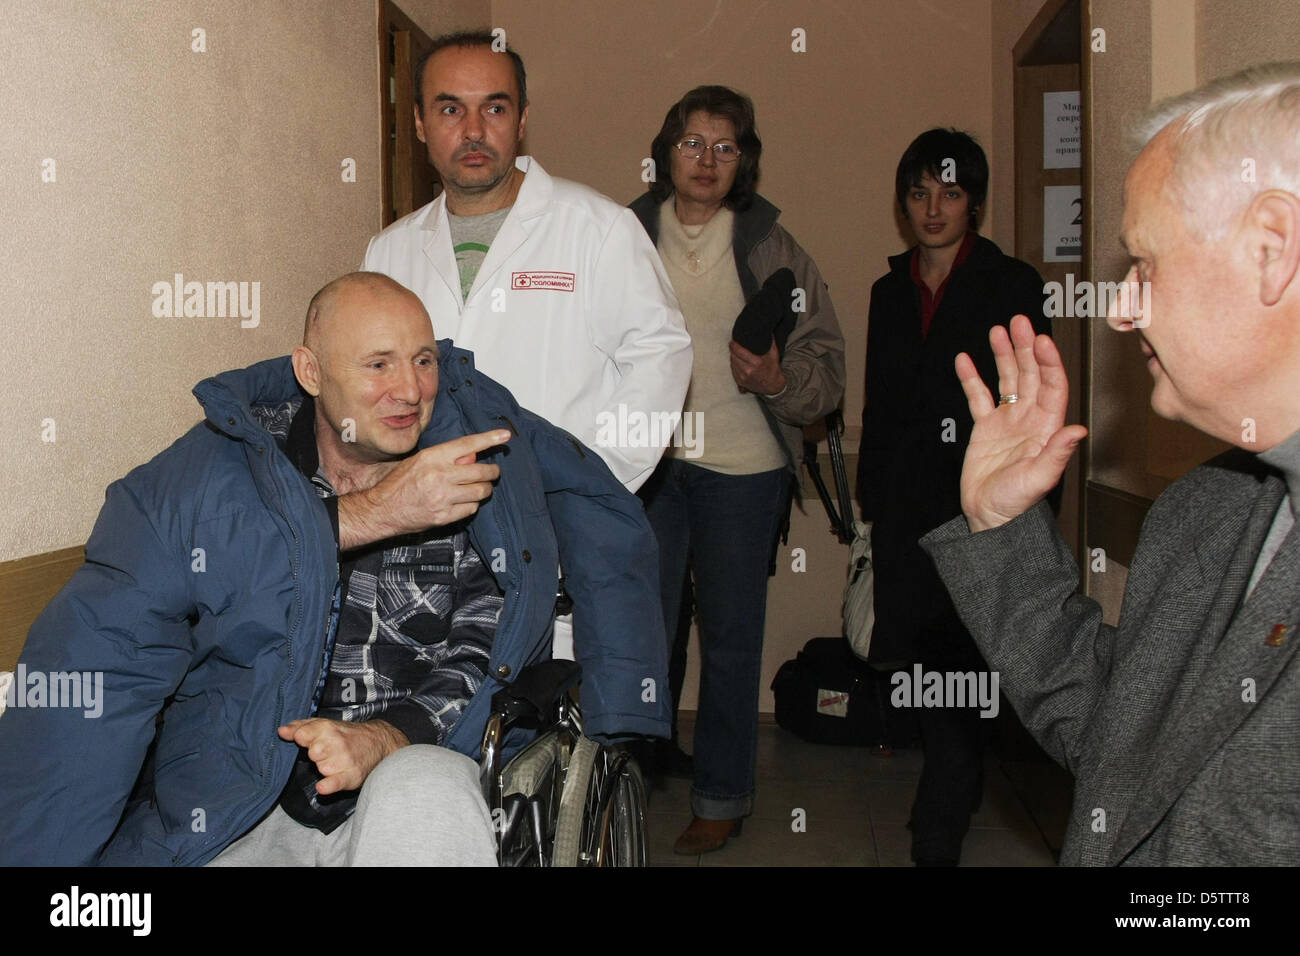 ARCHIVE IMAGES: Oct. 12, 2010 - Russia - Mikhail Beketov, a Russian journalist who suffered brain damage and lost a leg after a brutal assault that followed his campaign against a highway project outside Moscow, died in Moscow. Pictured: Moscow. Russian journalist Mikhail Beketov leaving court after participating in court hearing. (Credit Image: Credit:  PhotoXpress/ZUMAPRESS.com/Alamy Live News) Stock Photo